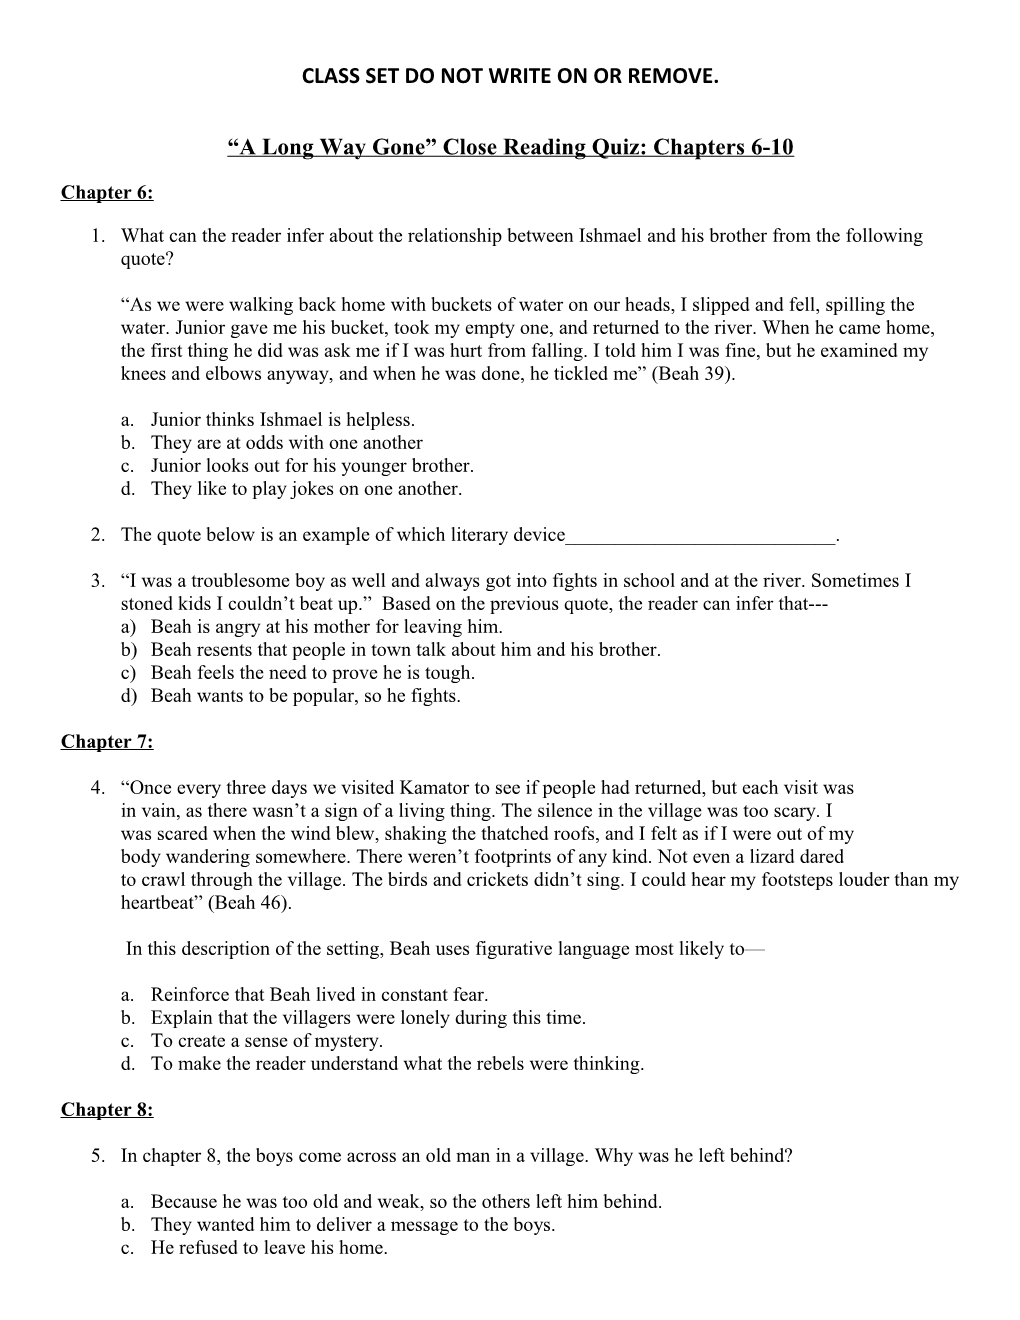 A Long Way Gone Close Reading Quiz: Chapters 6-10